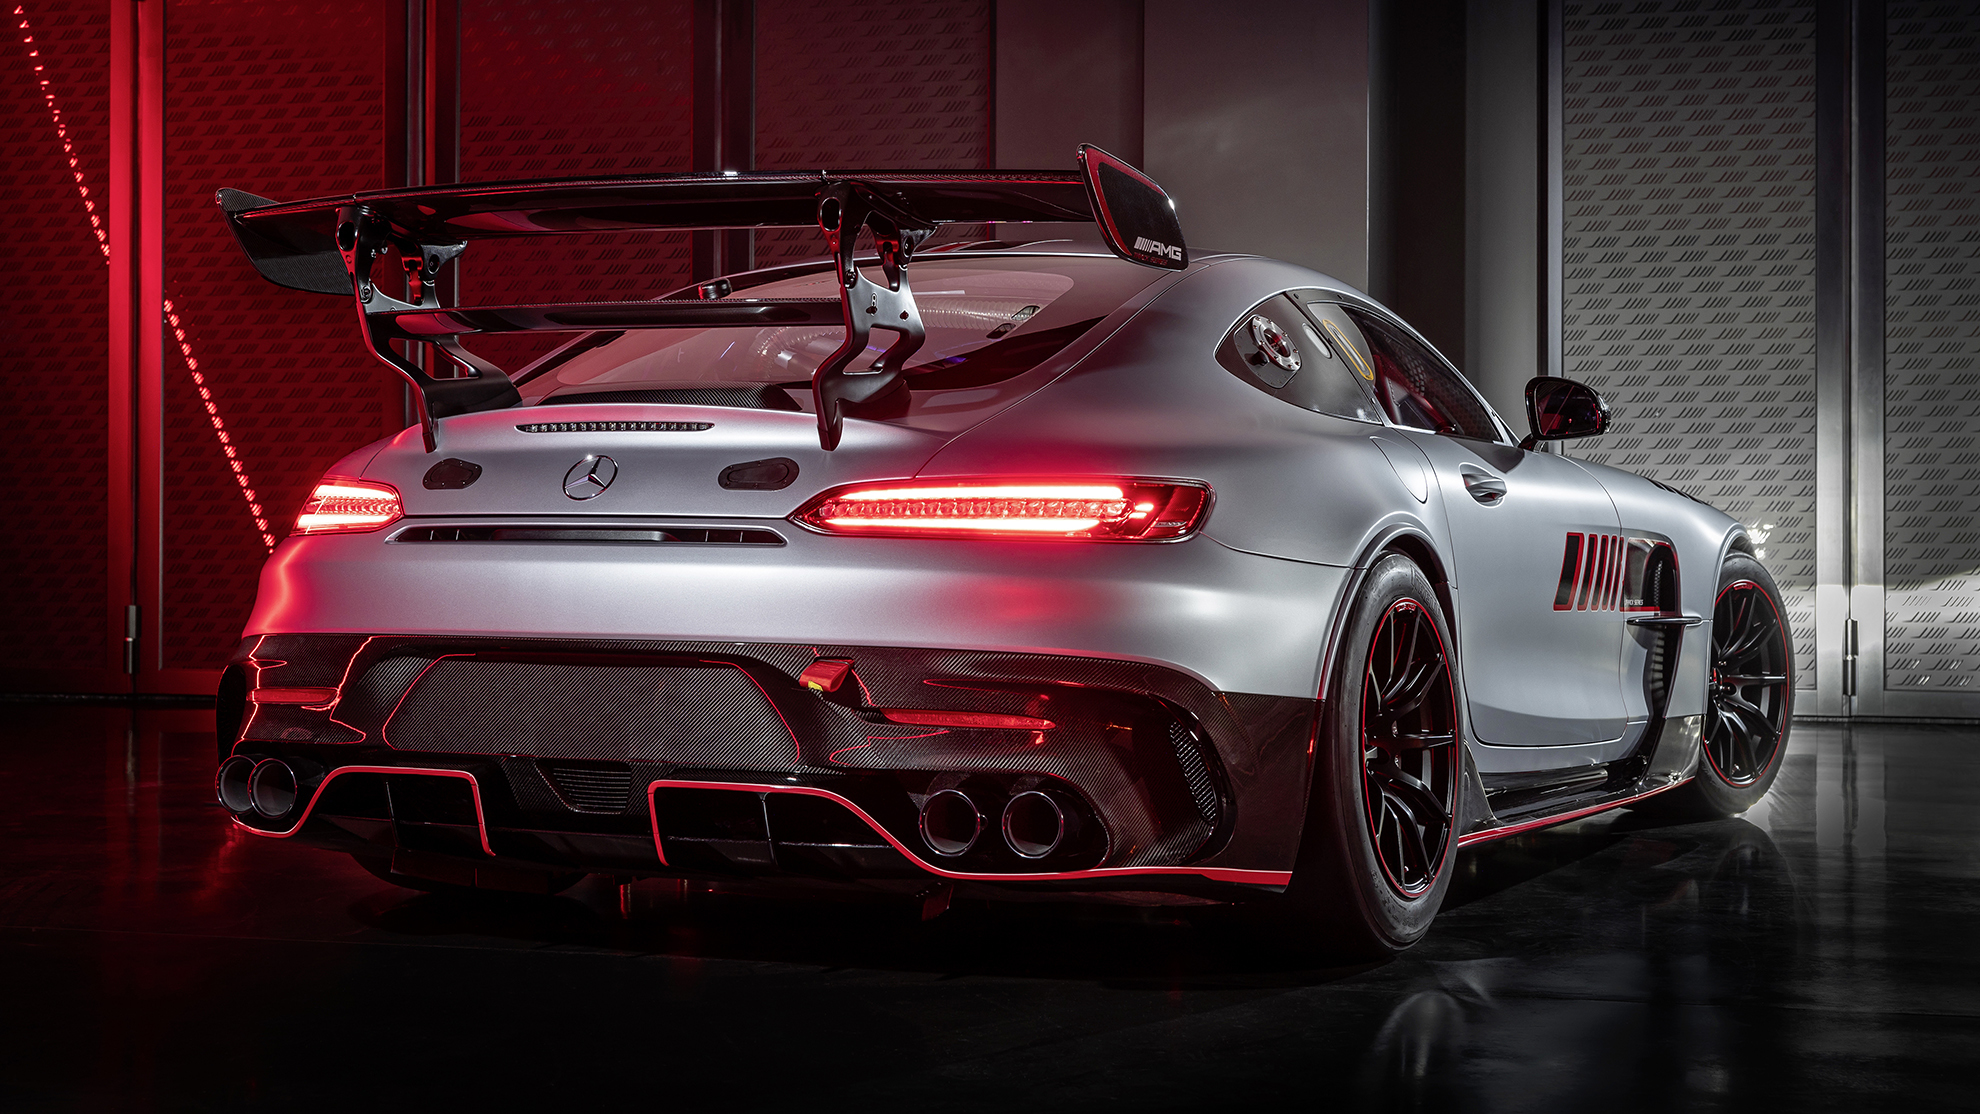 Merceds-AMG GT Track Series - exclusivo - 55 unidades - serie limitada - Black Series - GT3 - GT4 - Black Series